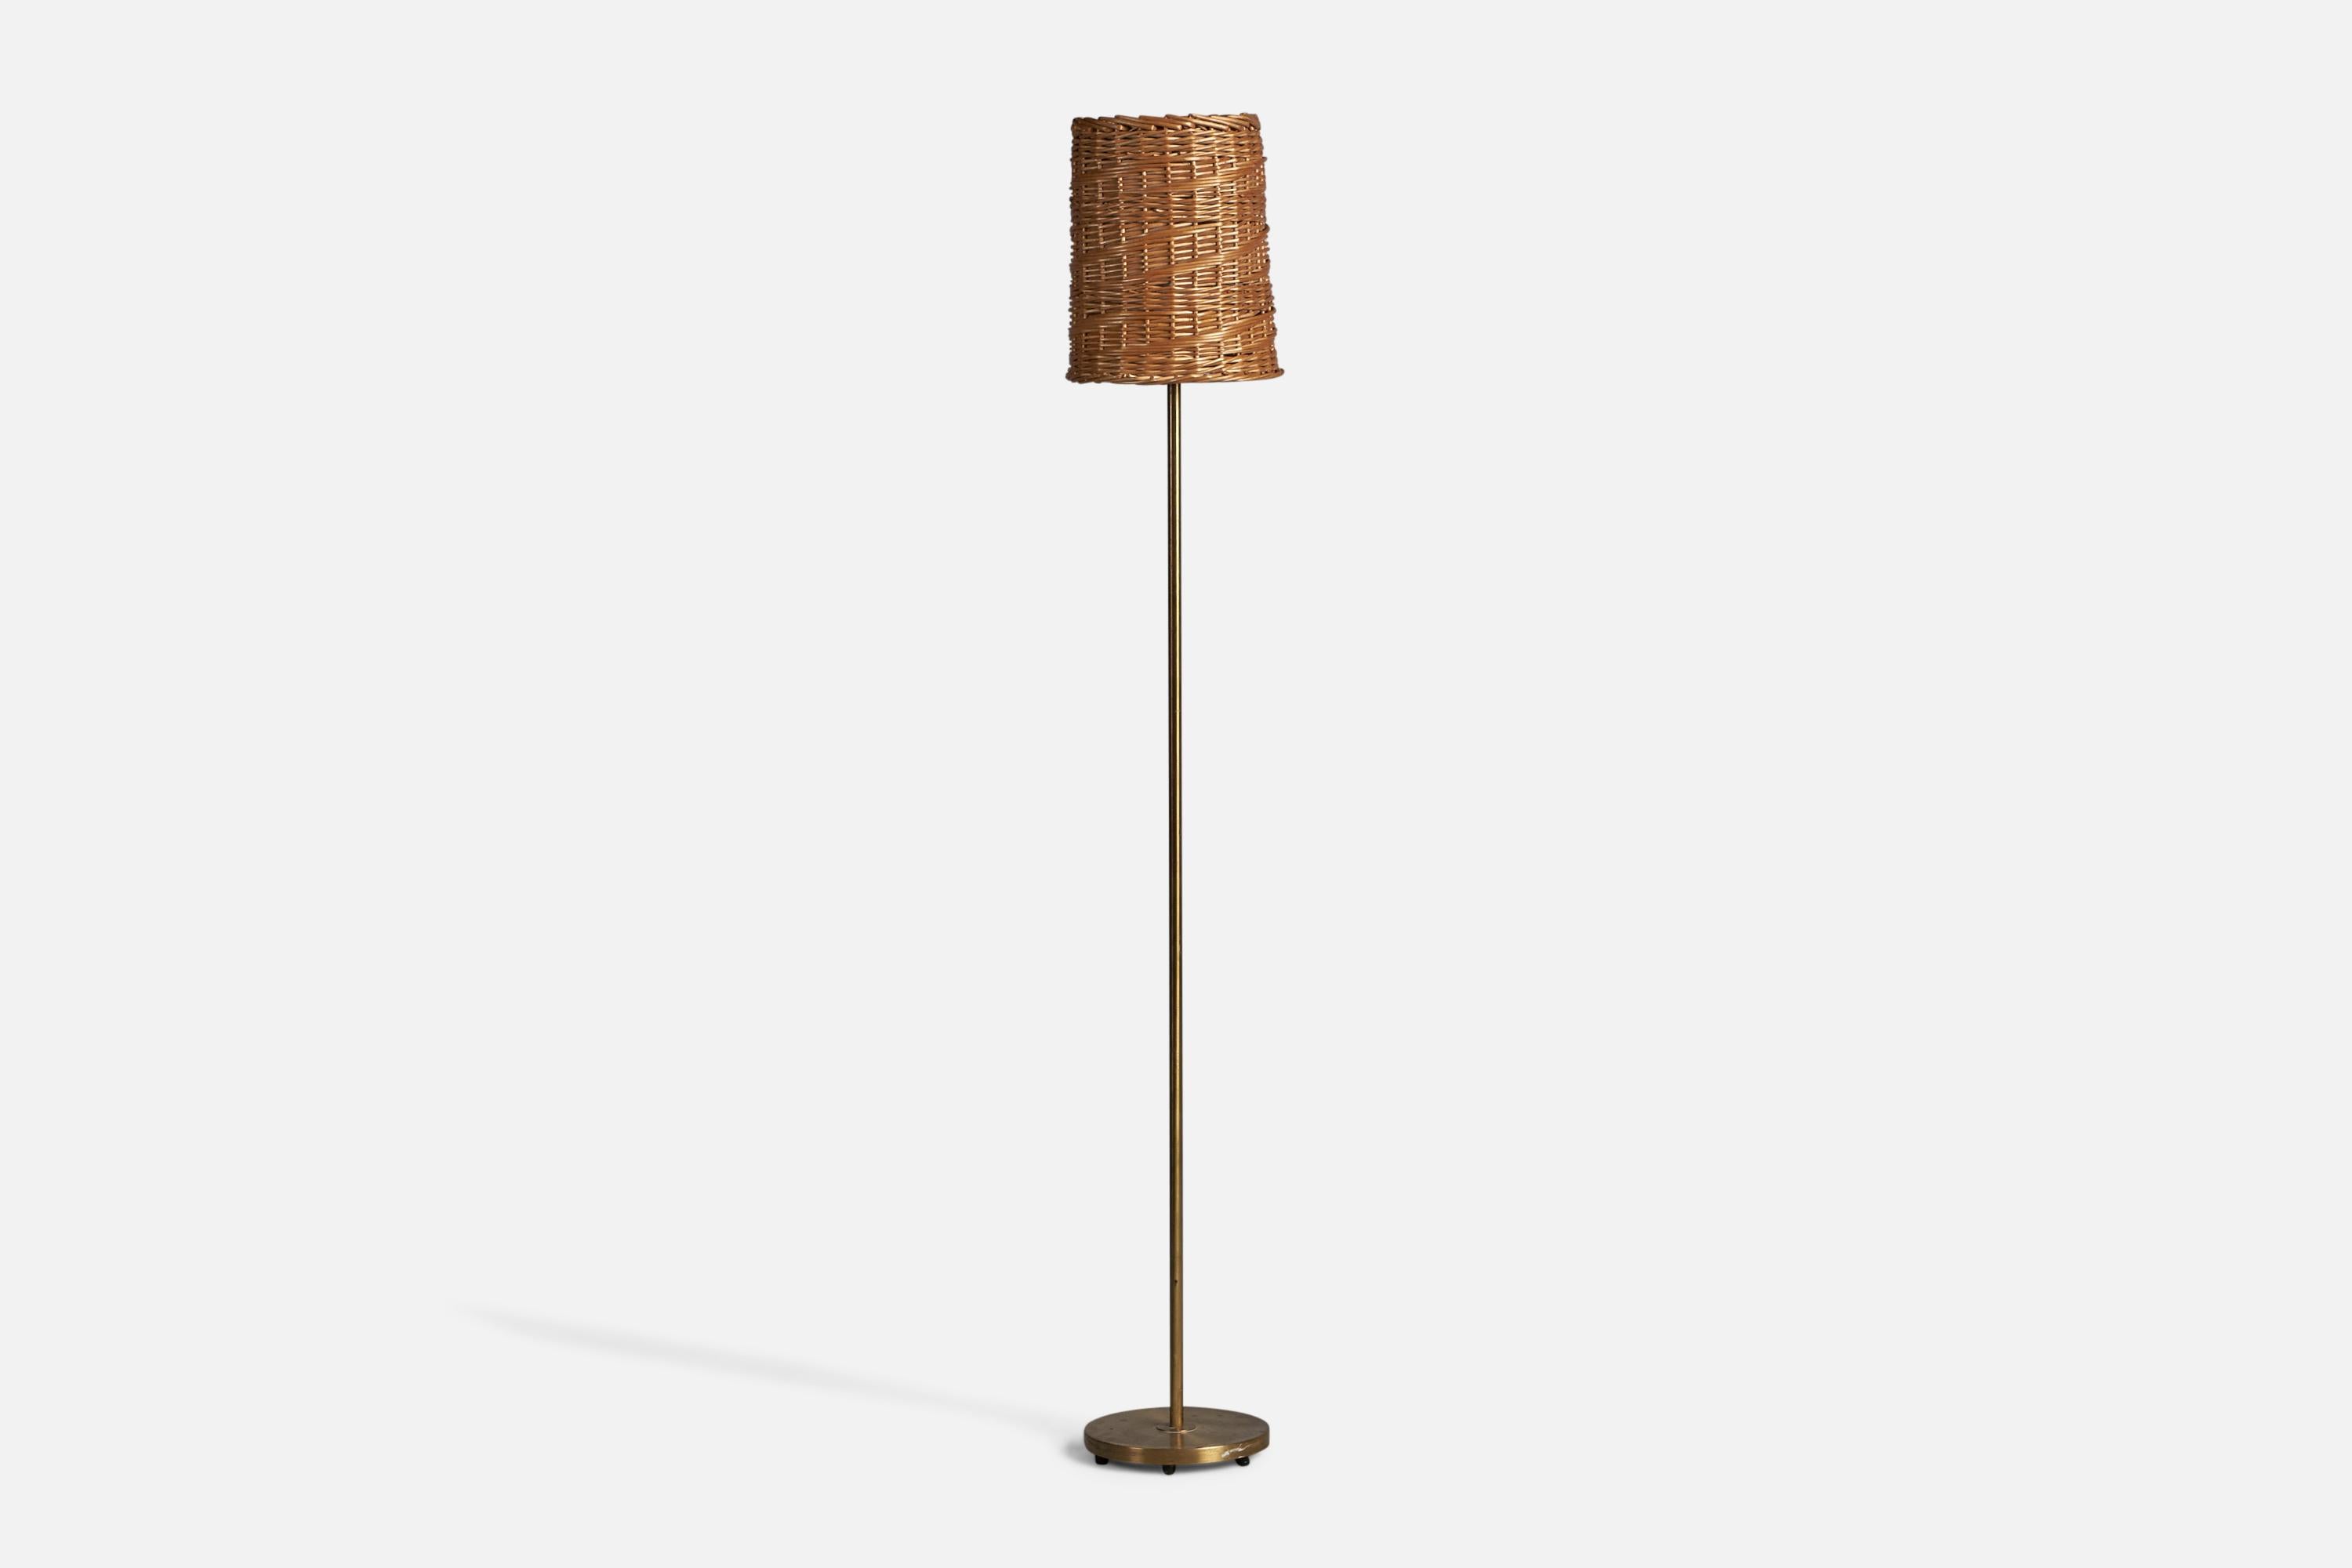 A brass and rattan floor lamp, designed and produced in Sweden, c. 1940s.

Overall Dimensions (inches): 60